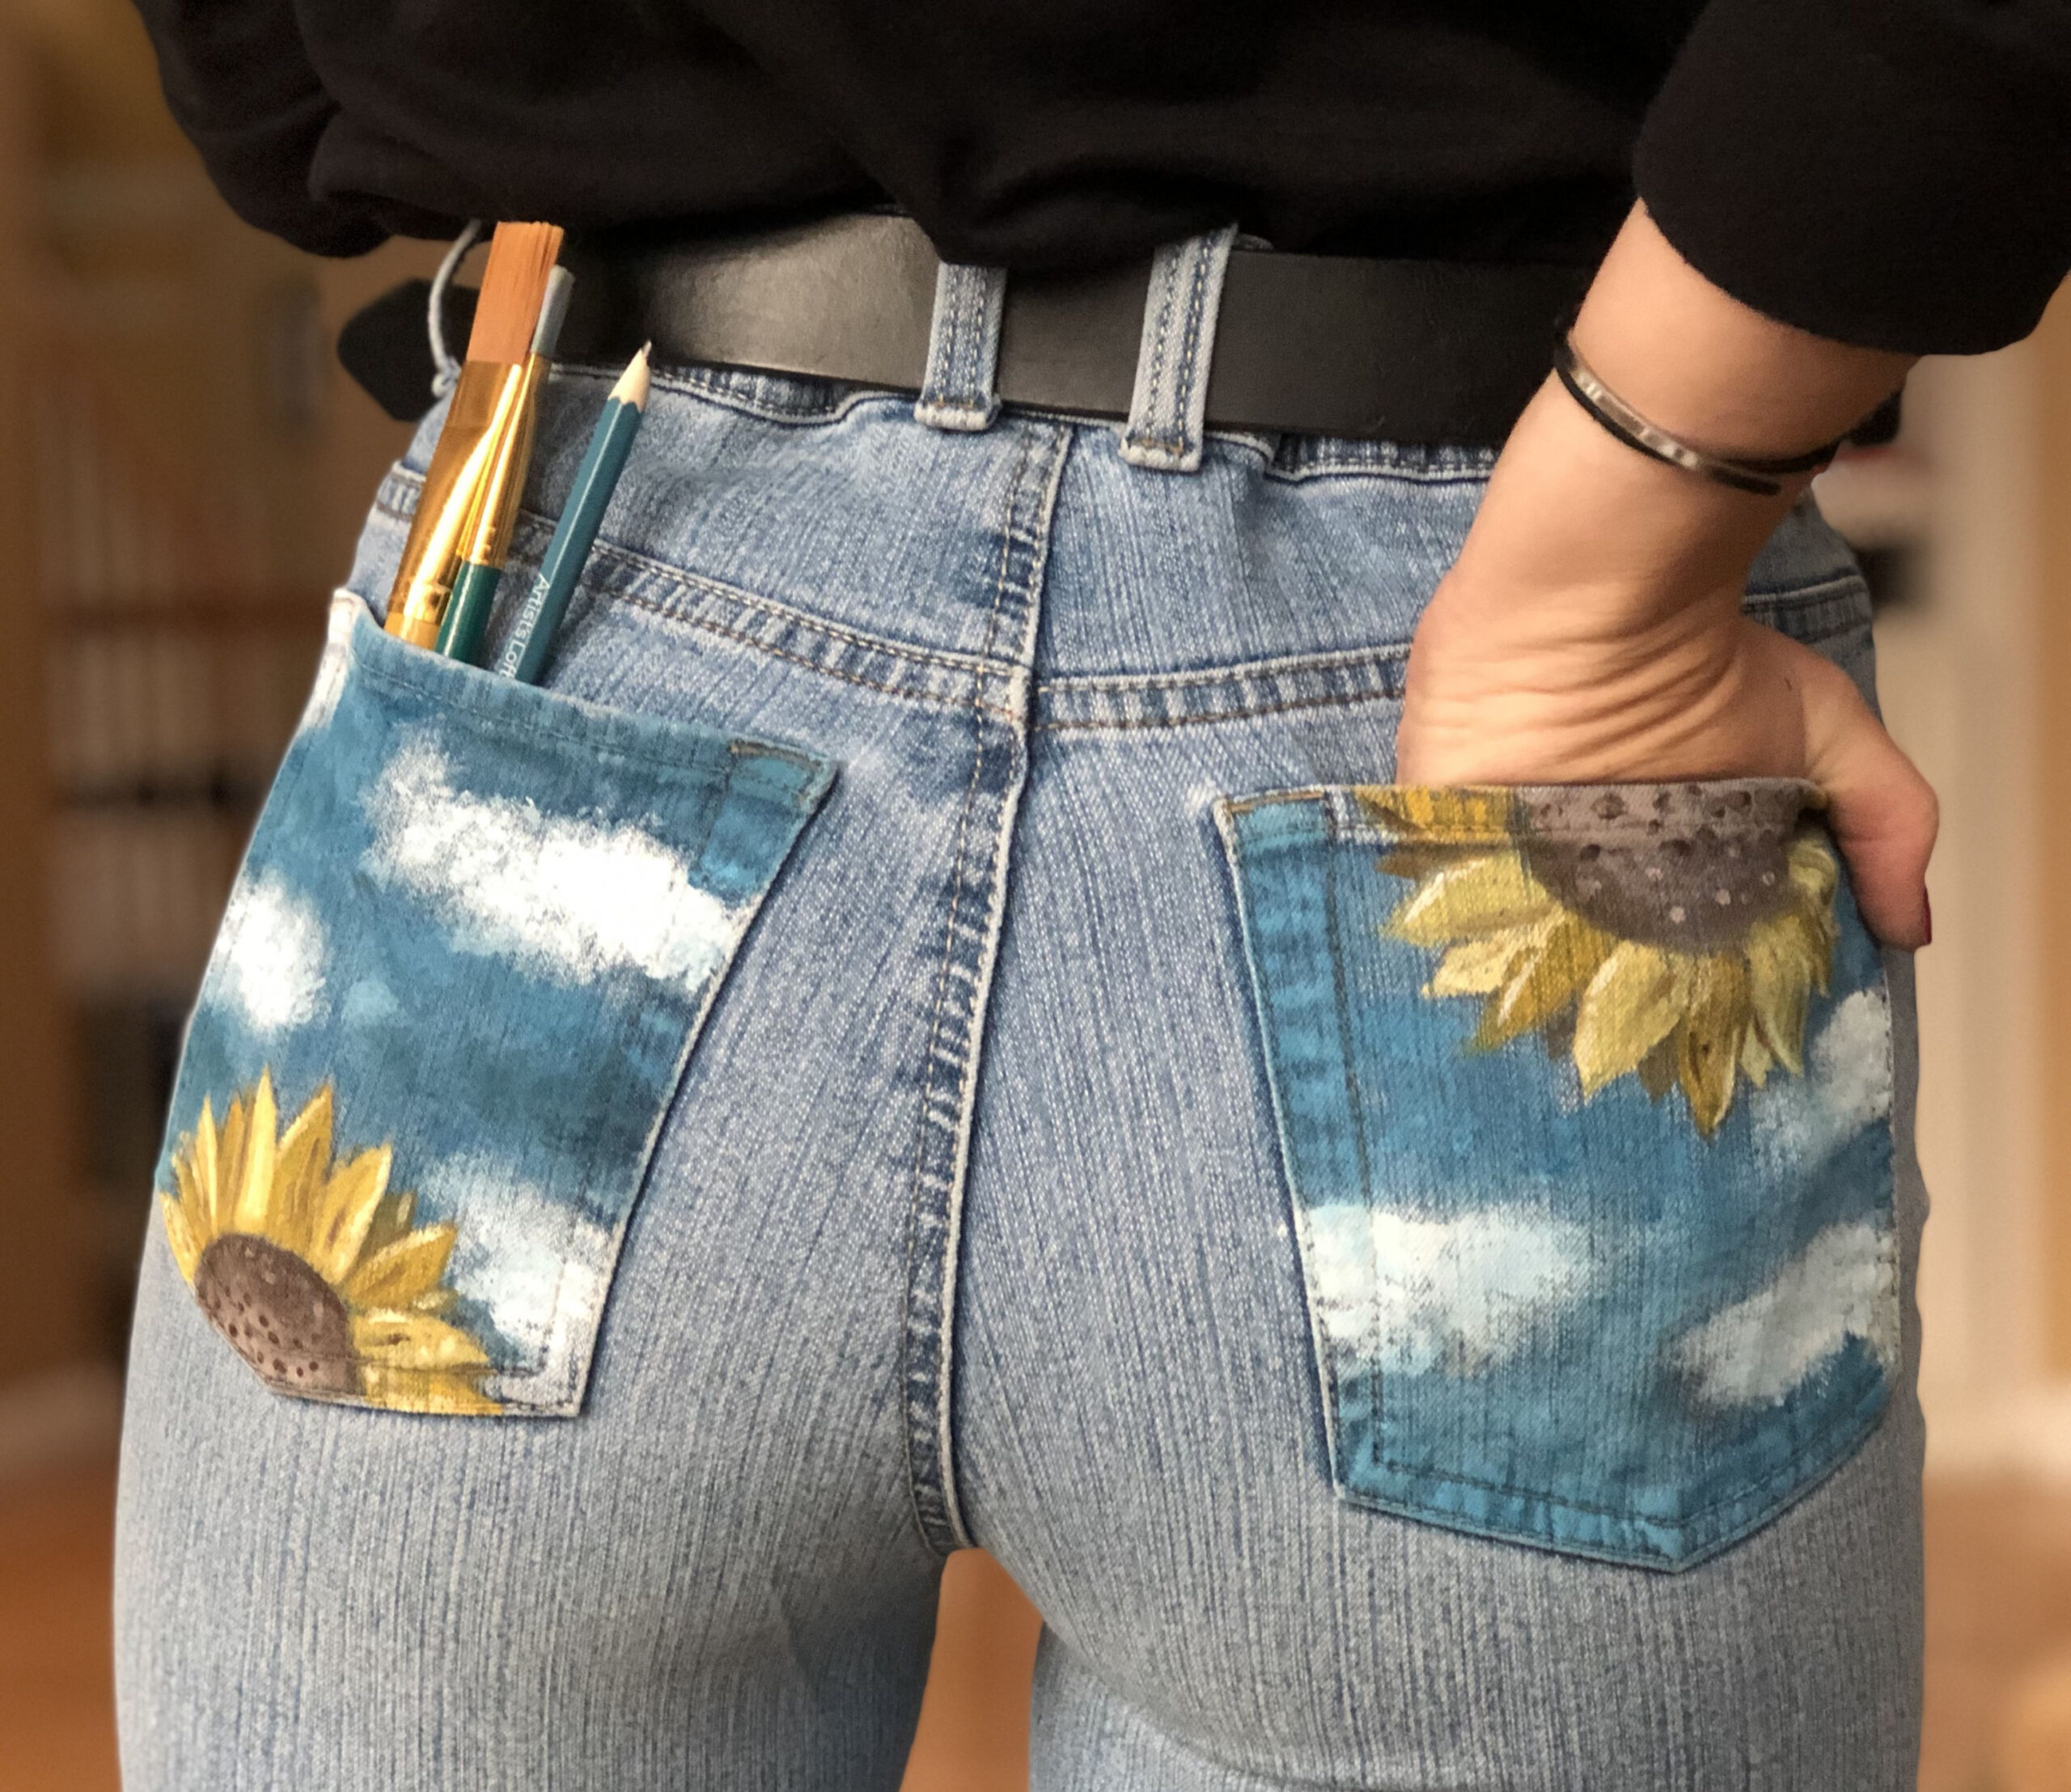 Sunflower painted jeans  Painted jeans, Jeans diy, Painted clothes